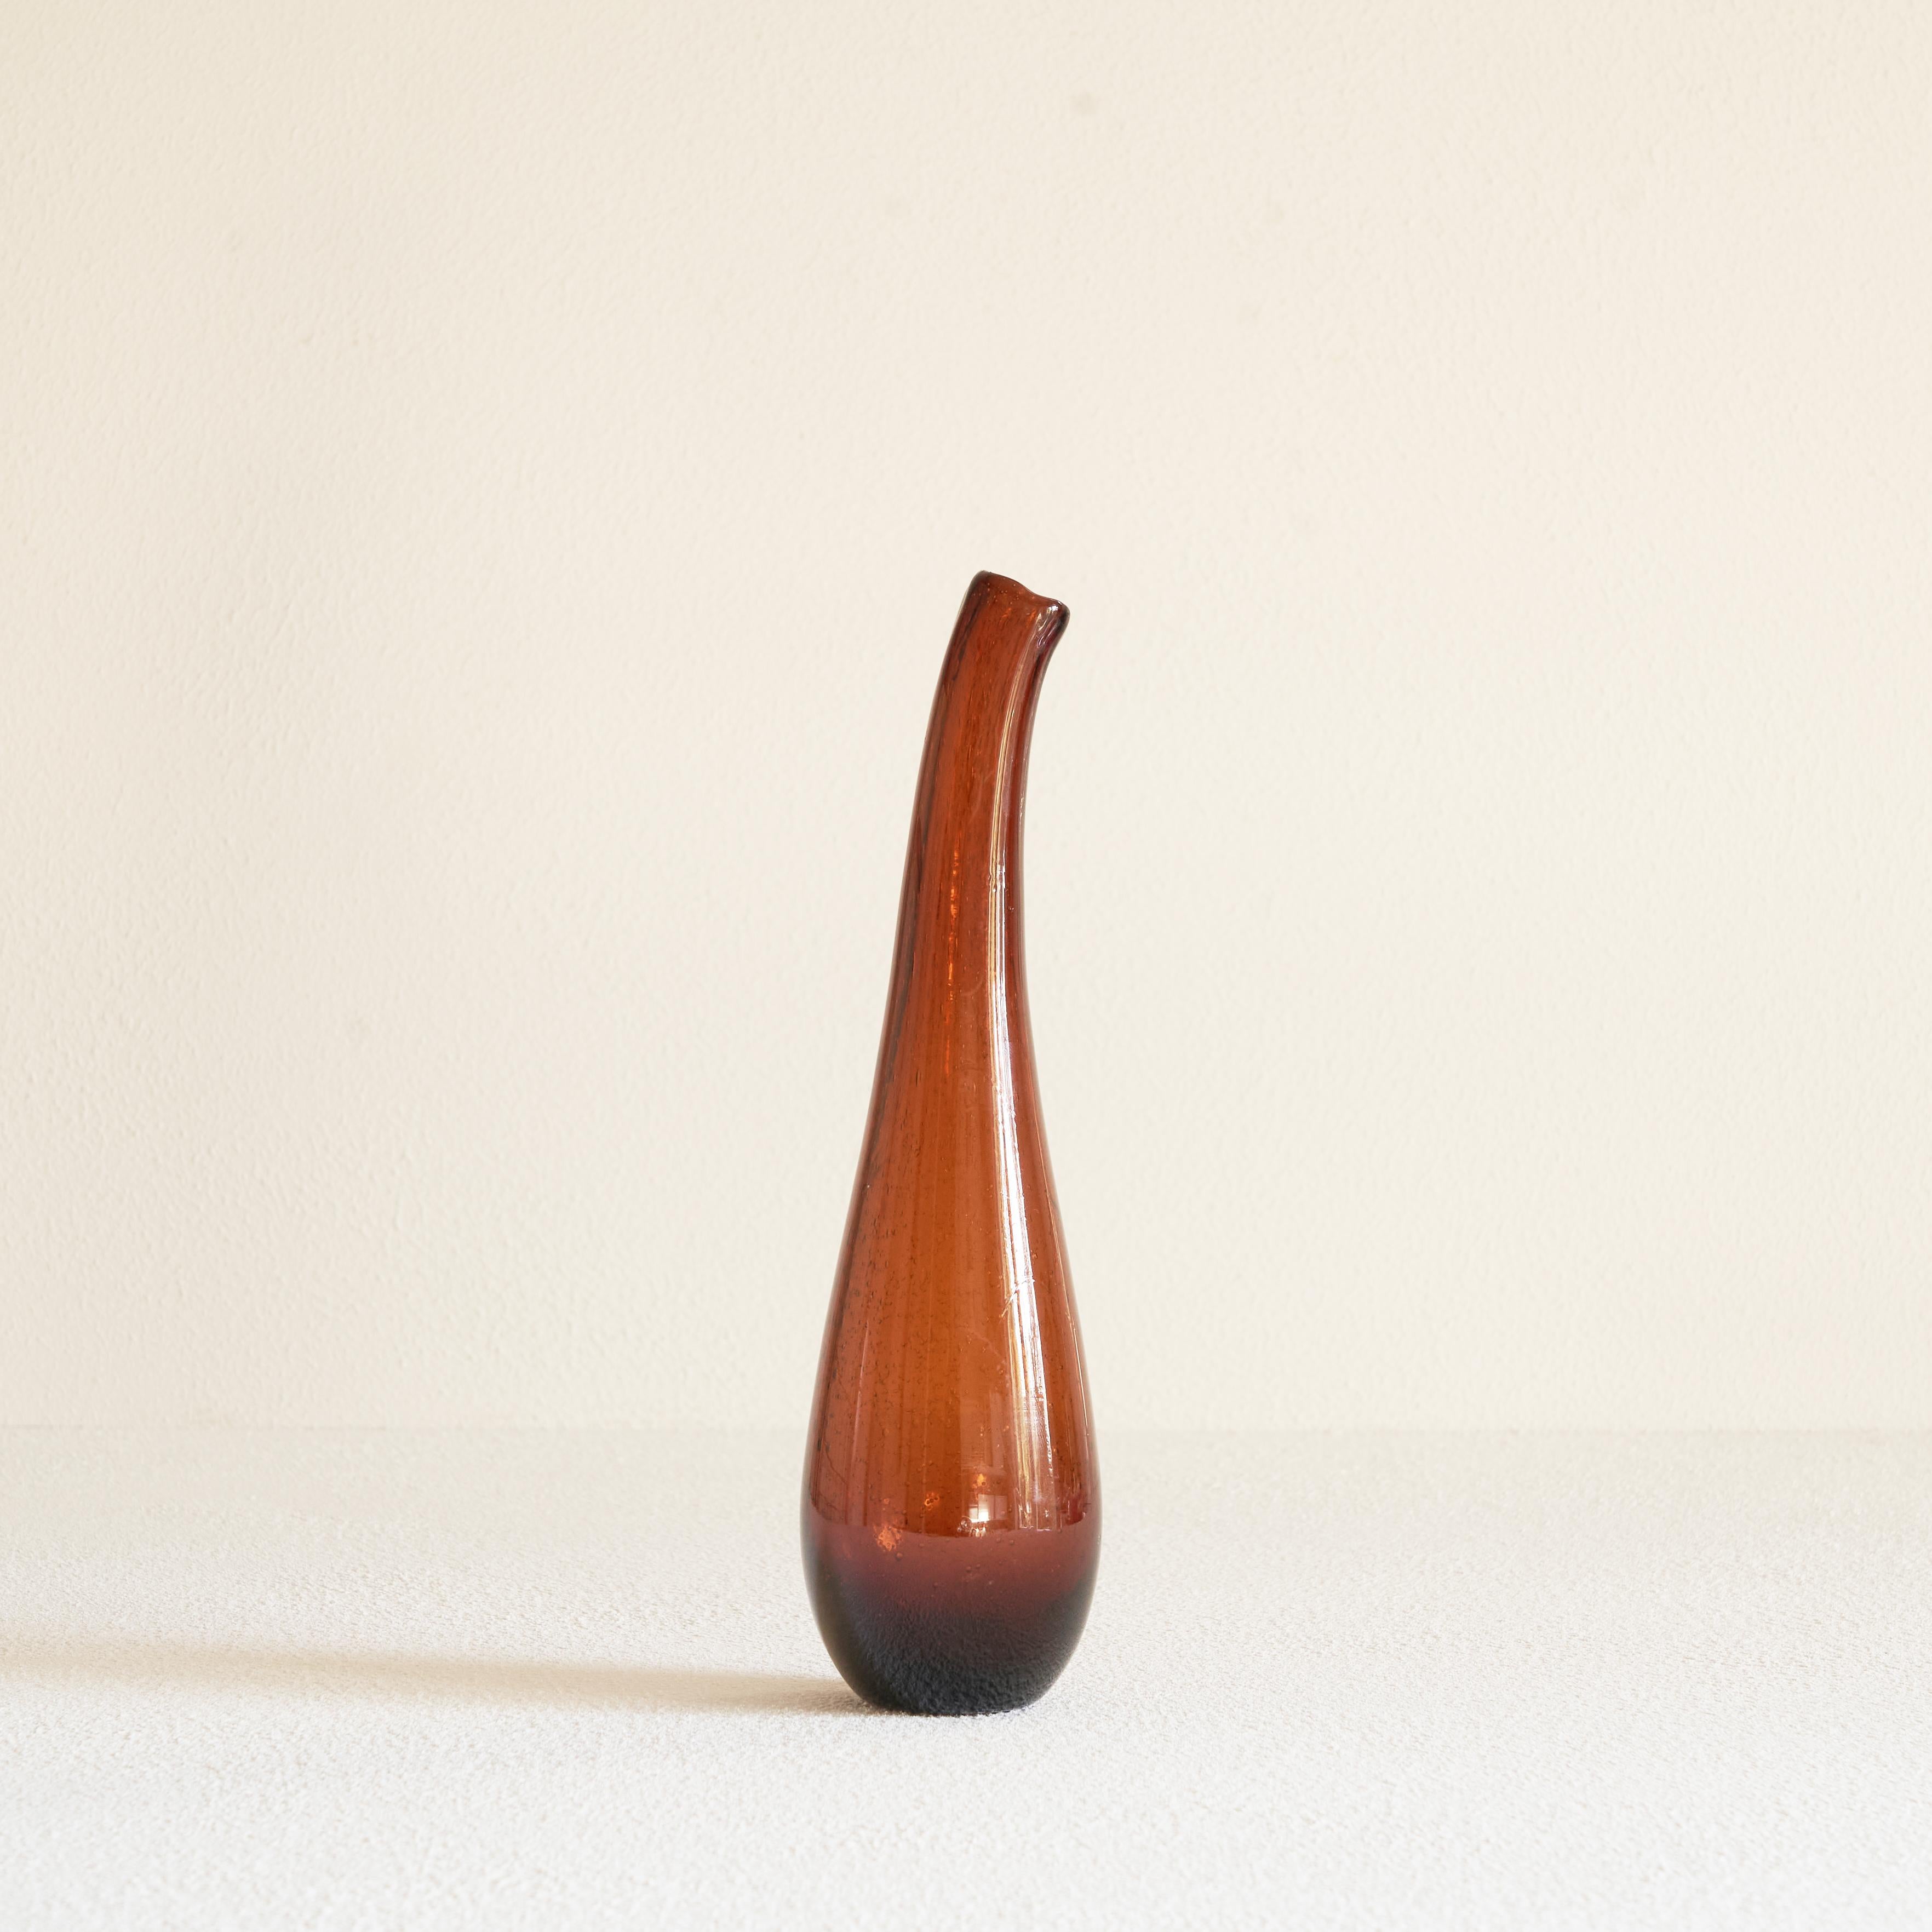 Freeform amber colored bubble glass vase 1960s.

This is a freeform midcentury bubble glass vase with a distinct and elegant freeform aesthetic. Hand blown, this vase is a unique piece of glass art. 

The vase features a very beautiful and